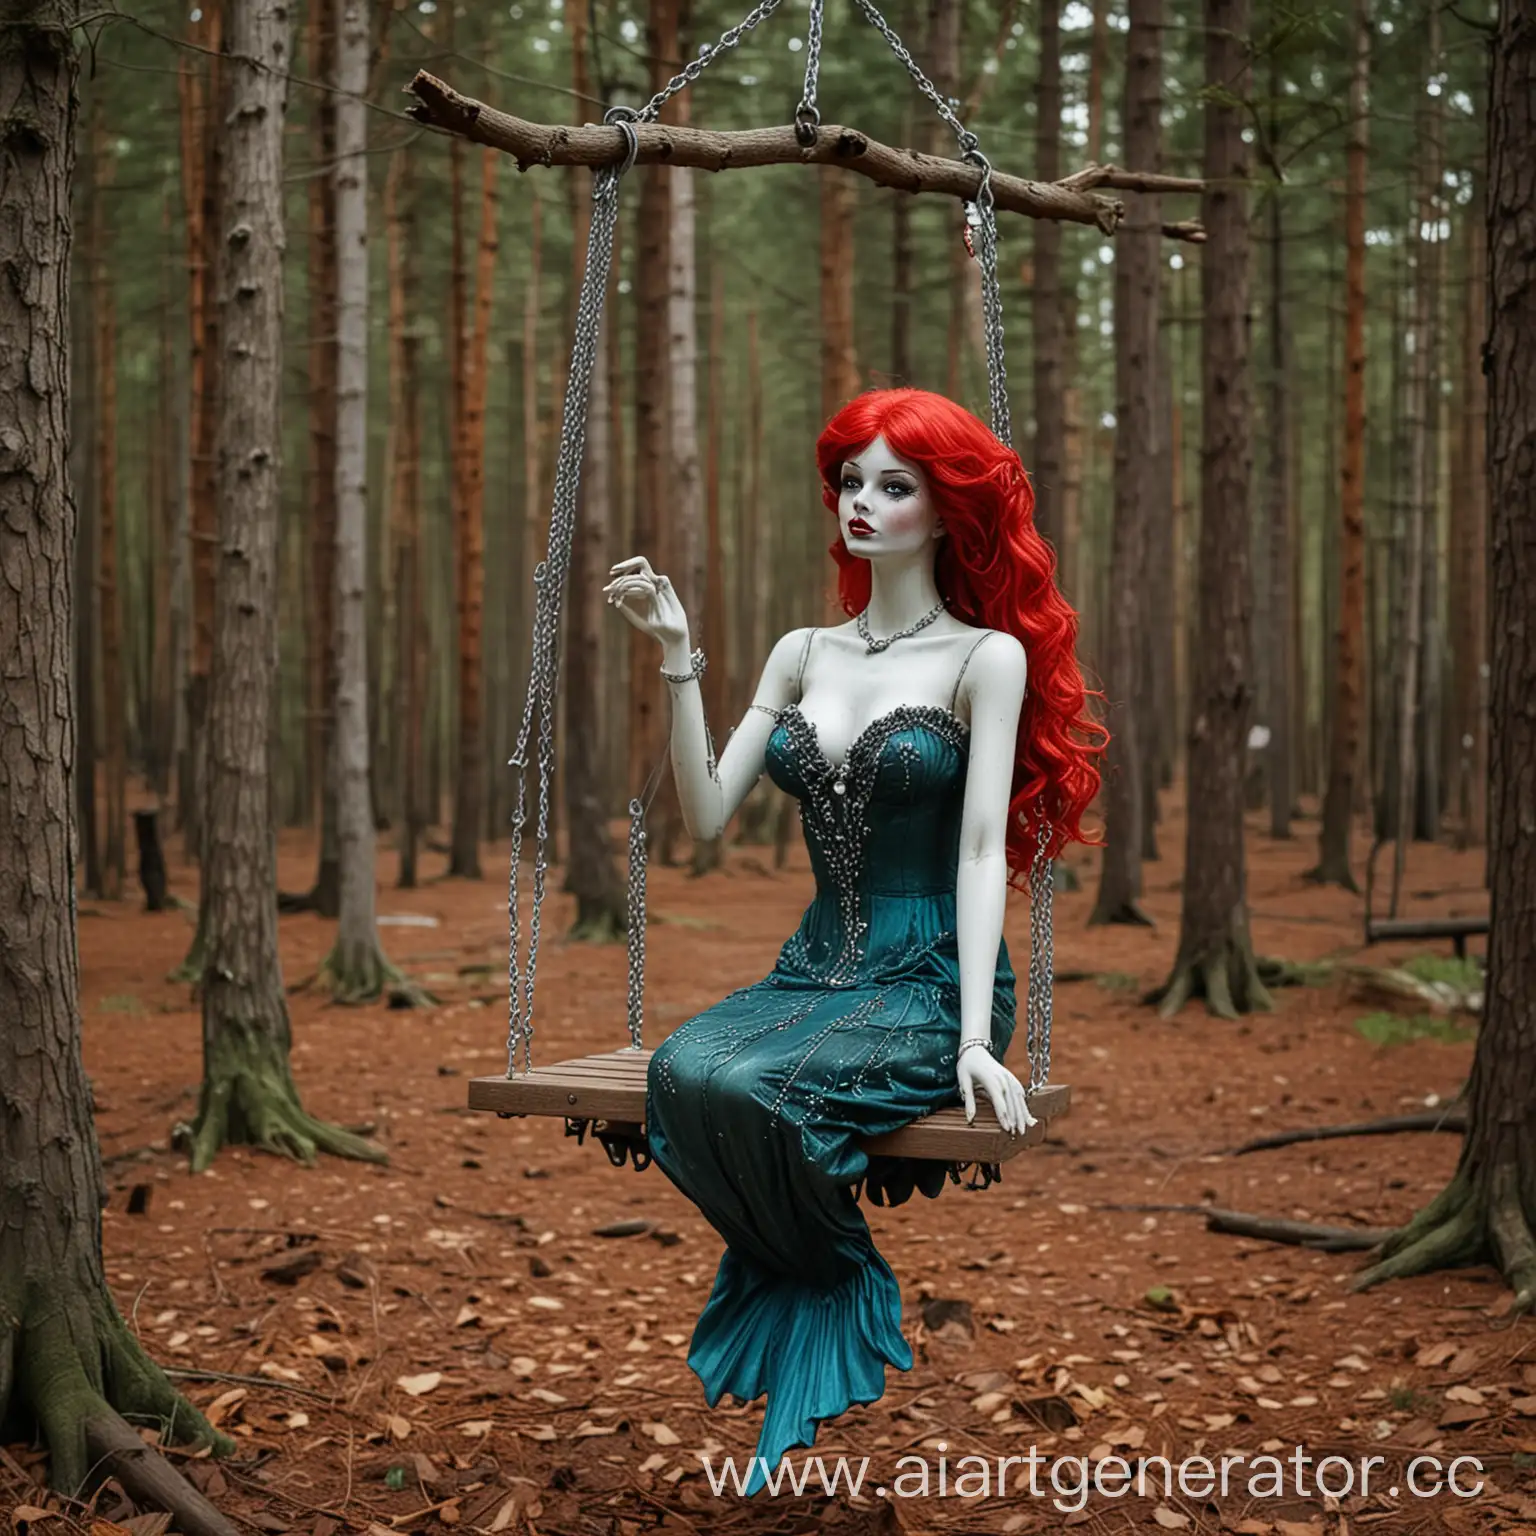 a scary mannequin in a red wig sits on a swing in the forest. the mannequin looks like a mermaid.